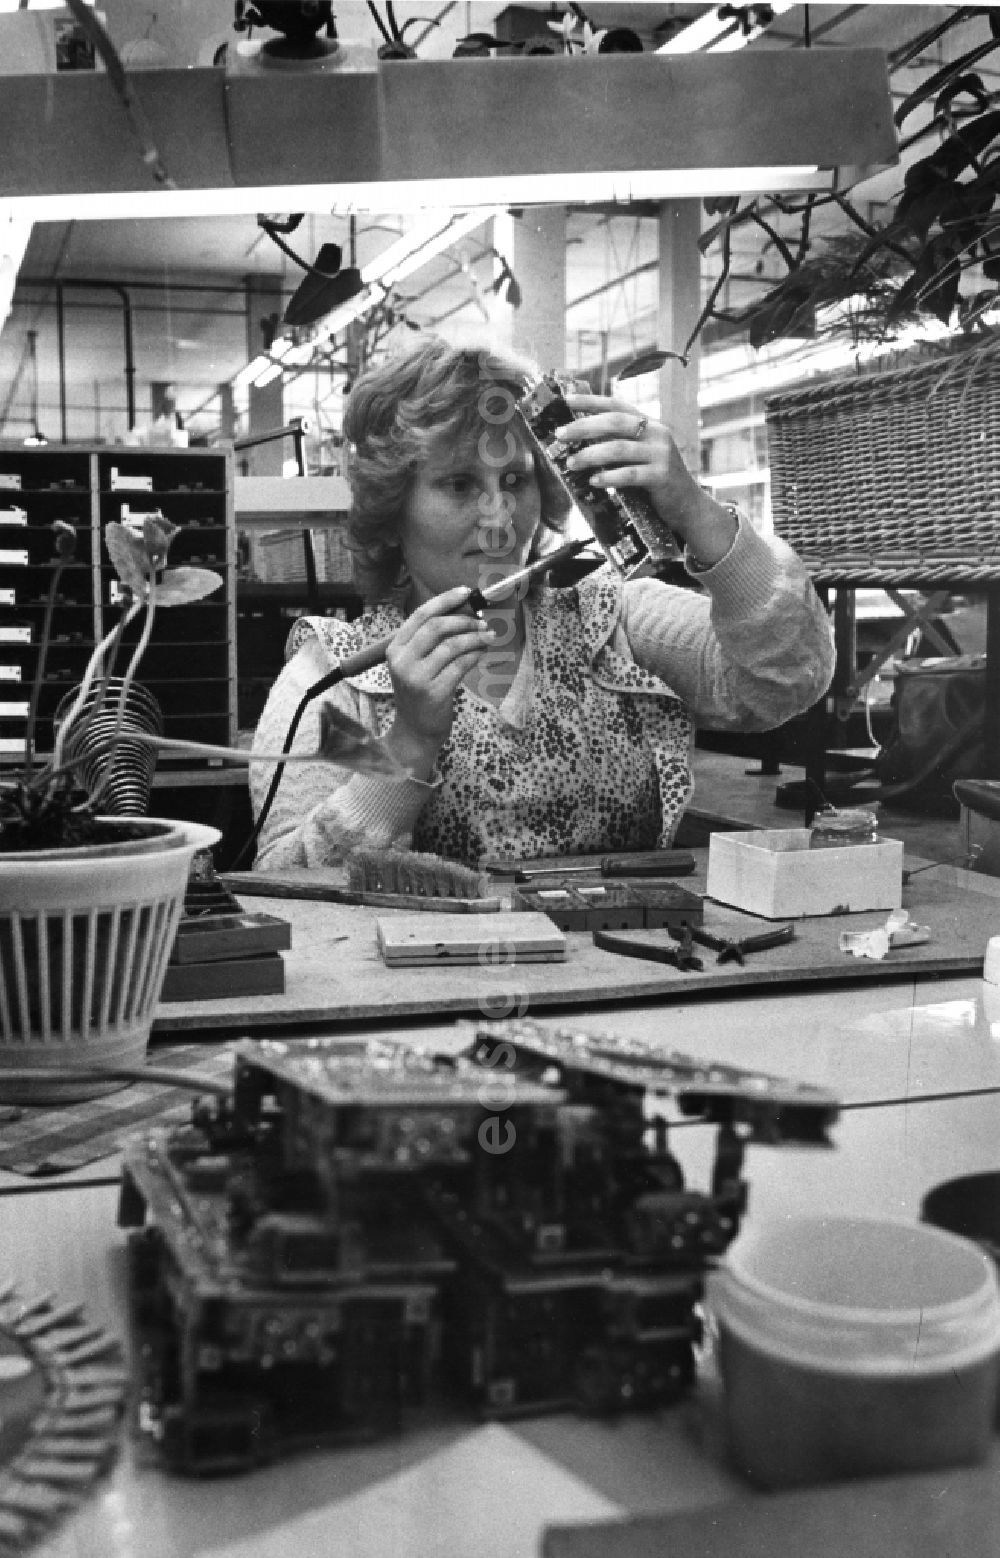 GDR image archive: Zella-Mehlis - Solder in the VEB Robotron electronics in Zella-Mehlis in the state of Thuringia in the area of the former GDR, German Democratic Republic